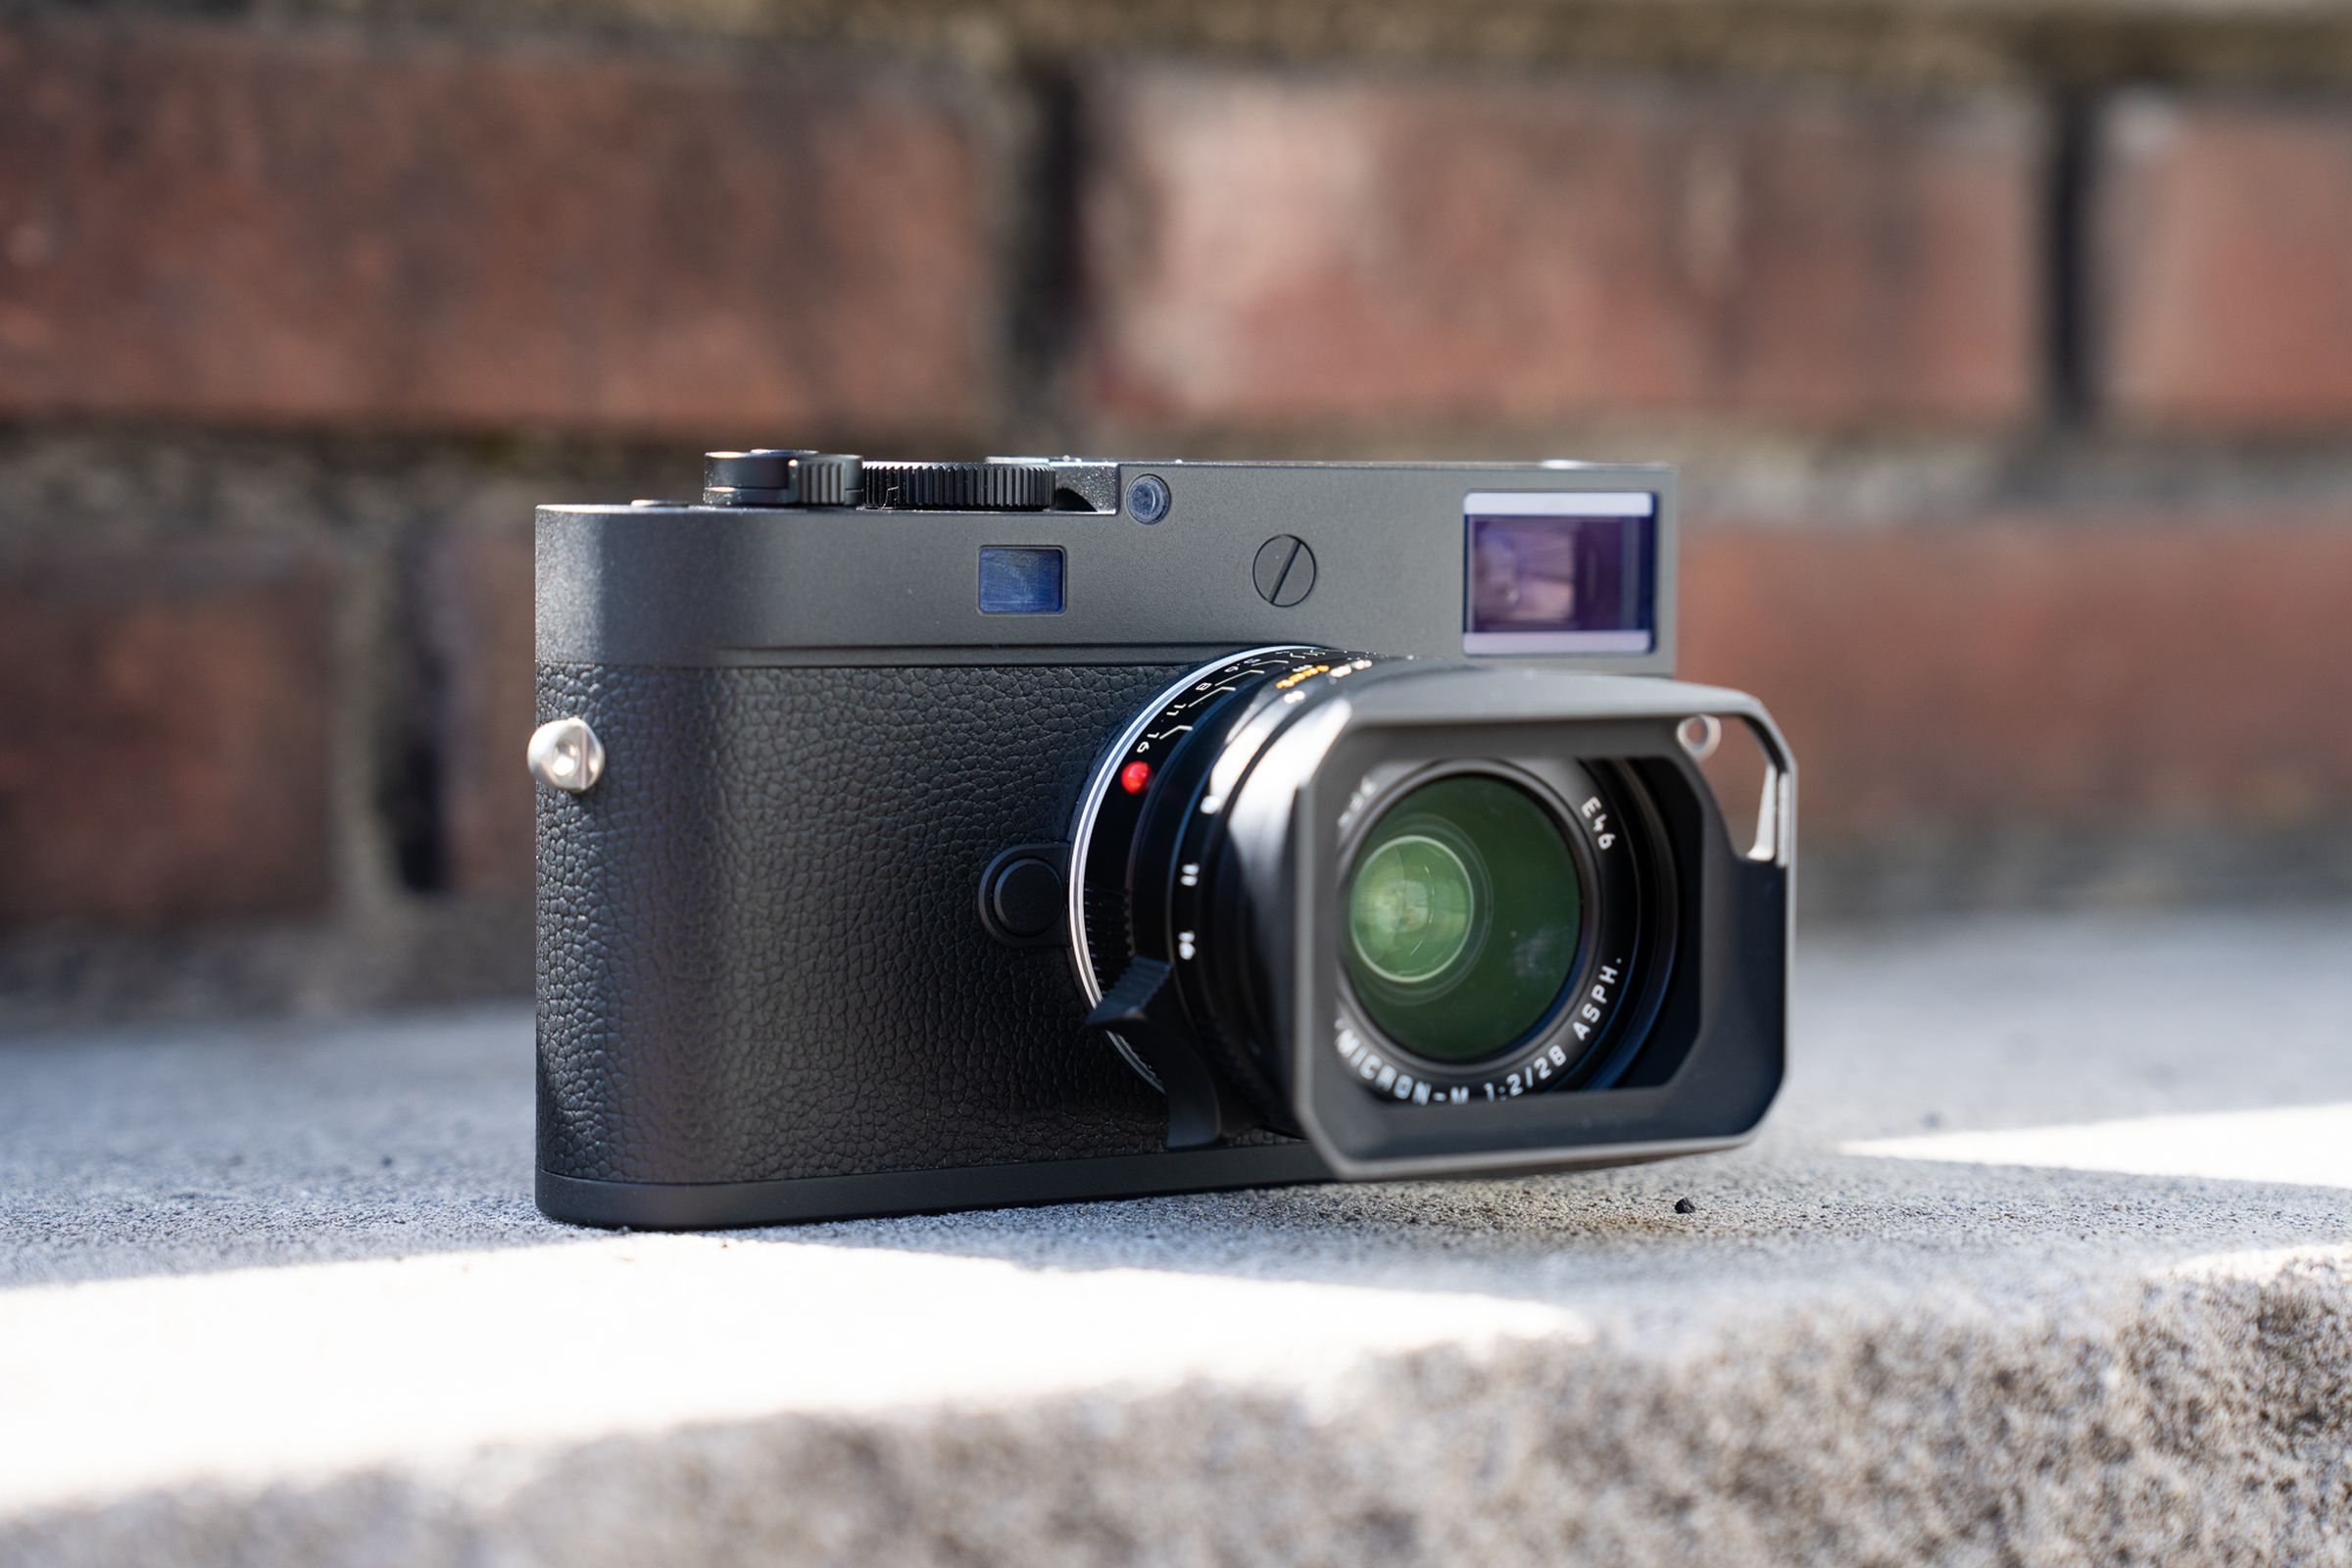 The M11 Monochrom digital rangefinder camera sitting on a stone ledge in front of a brick wall.